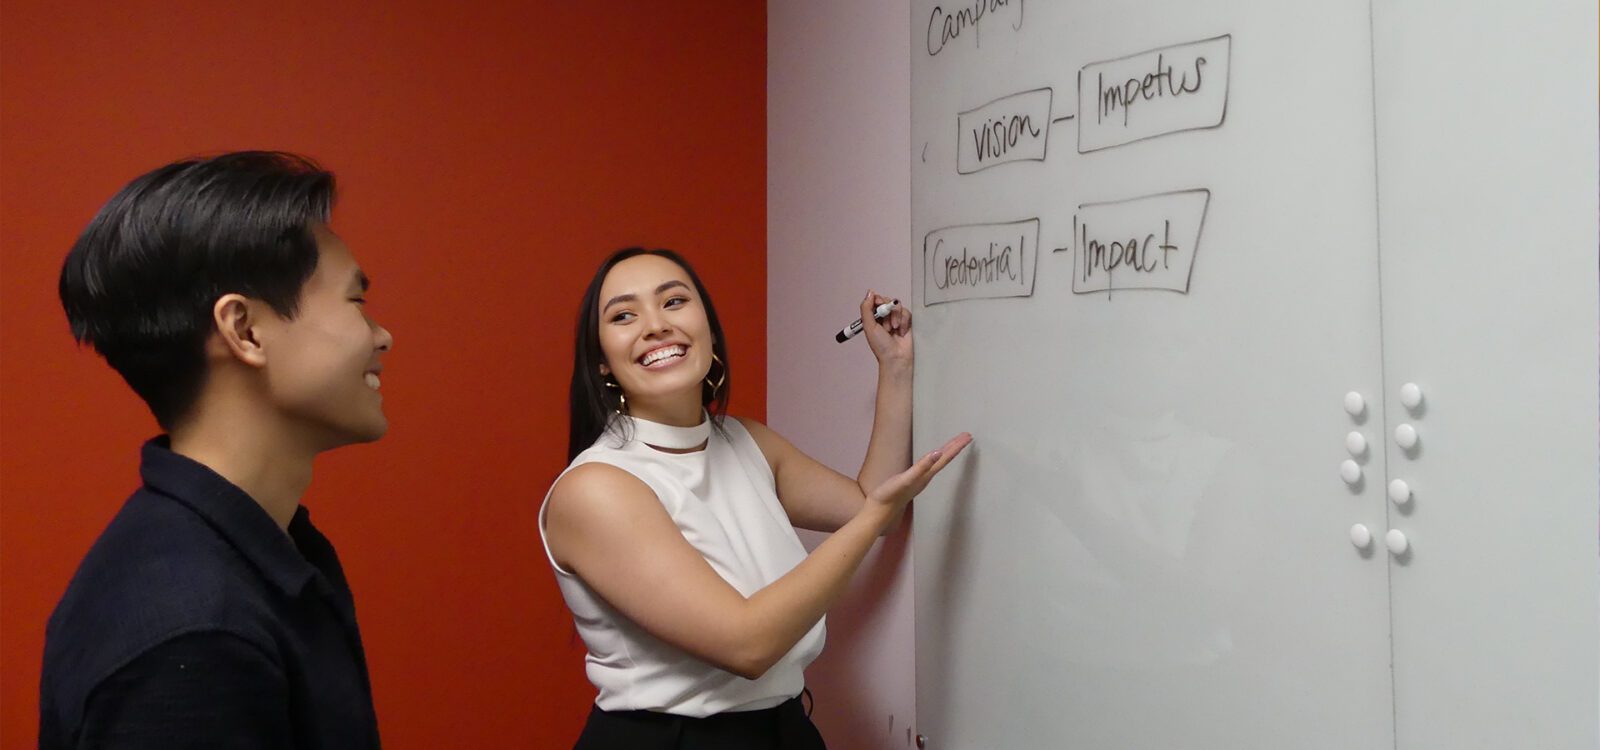 Two people smiling and collaborating in front of a whiteboard